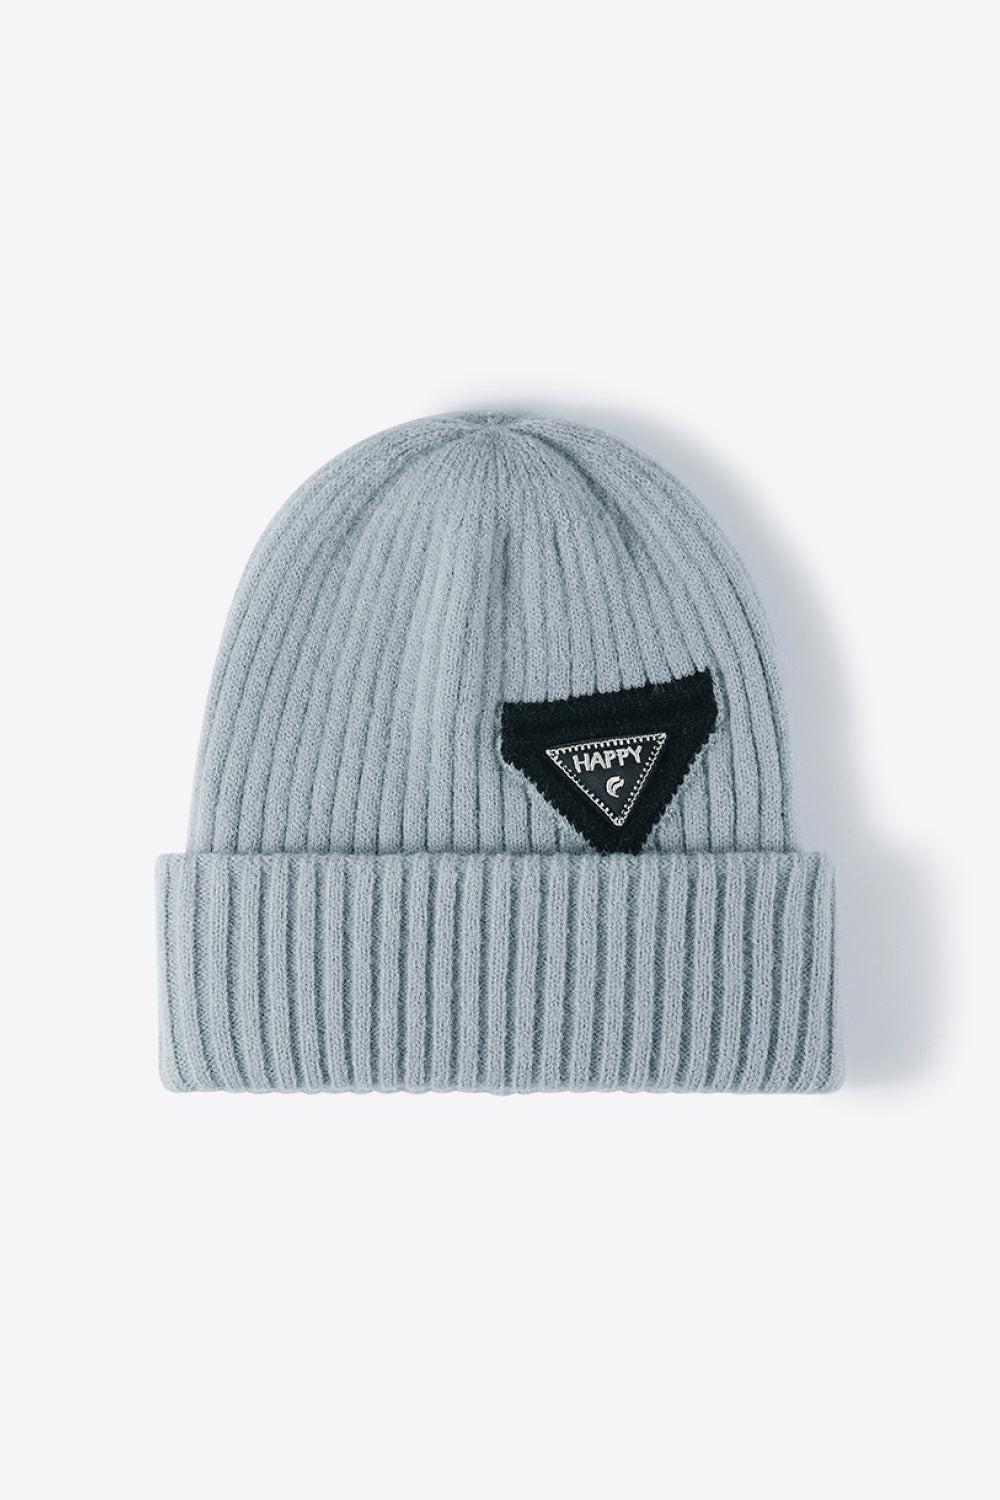 HAPPY Contrast Beanie-[Adult]-[Female]-Steel-One Size-2022 Online Blue Zone Planet